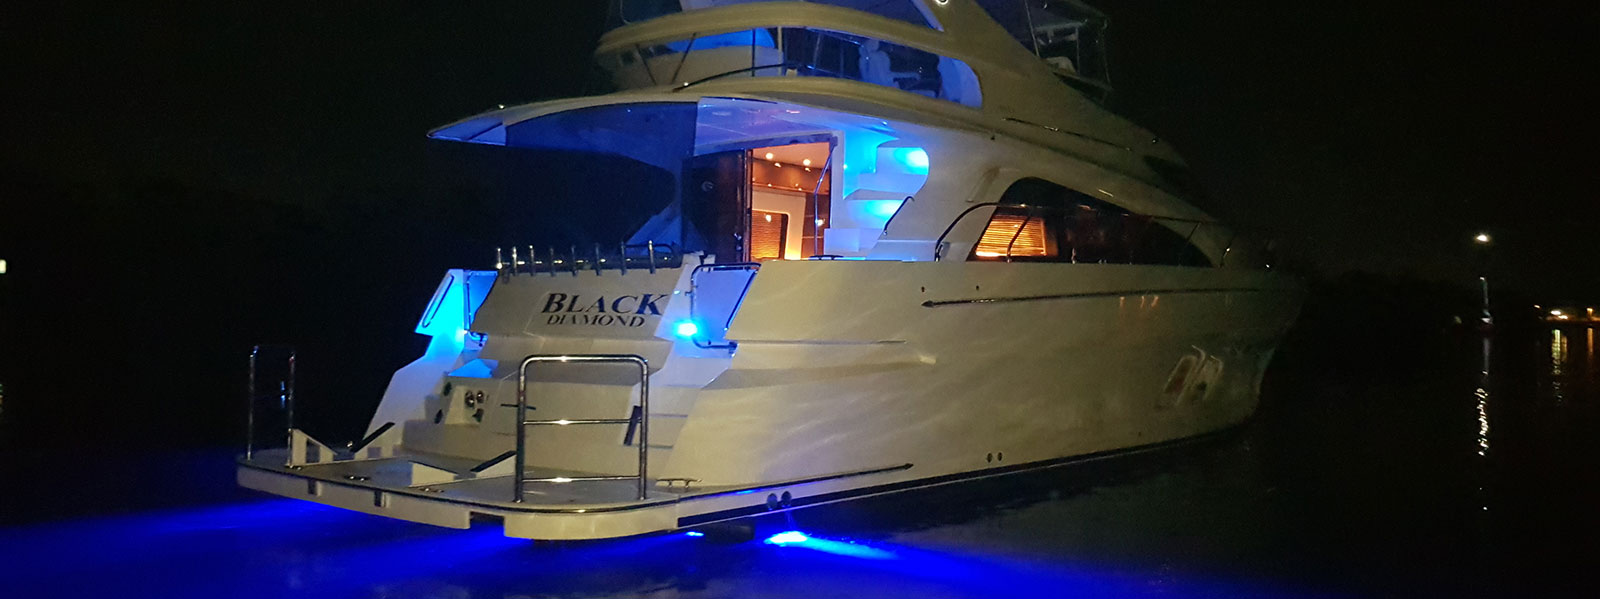 Yacht at night with blue lighting in water.